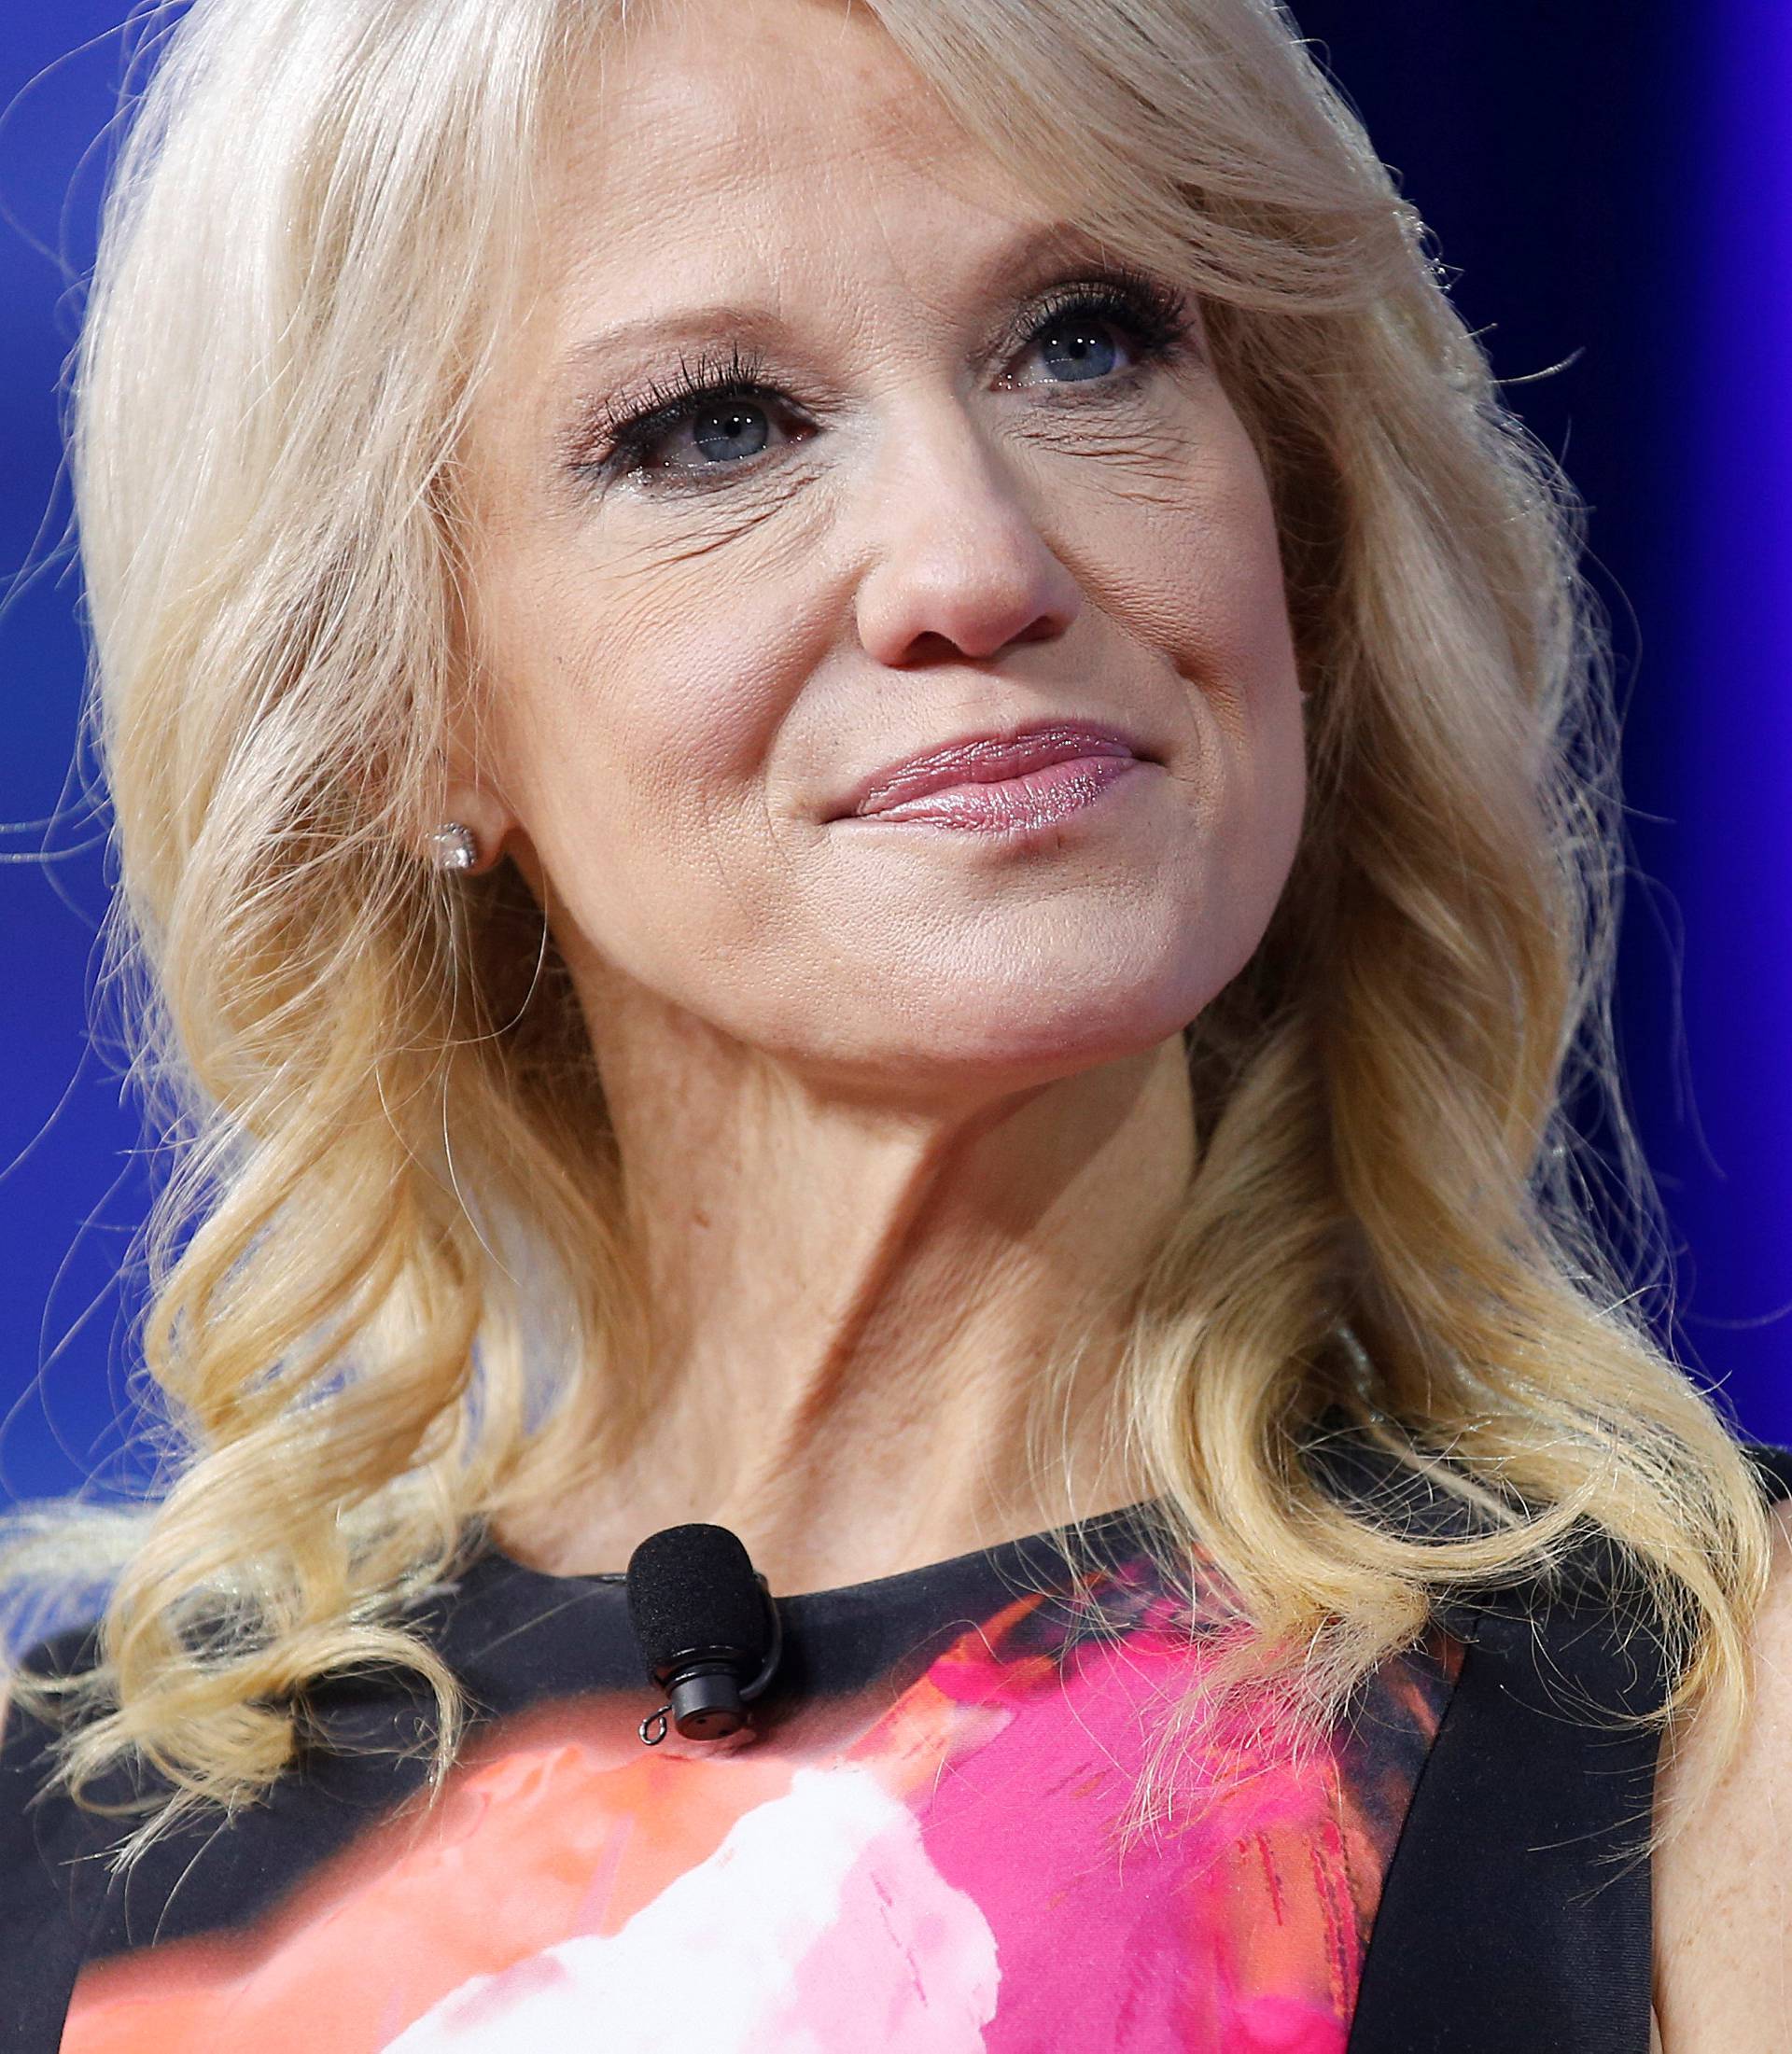 White House Senior Advisor Kellyanne Conway speaks during the Conservative Political Action Conference (CPAC) in National Harbor, Maryland